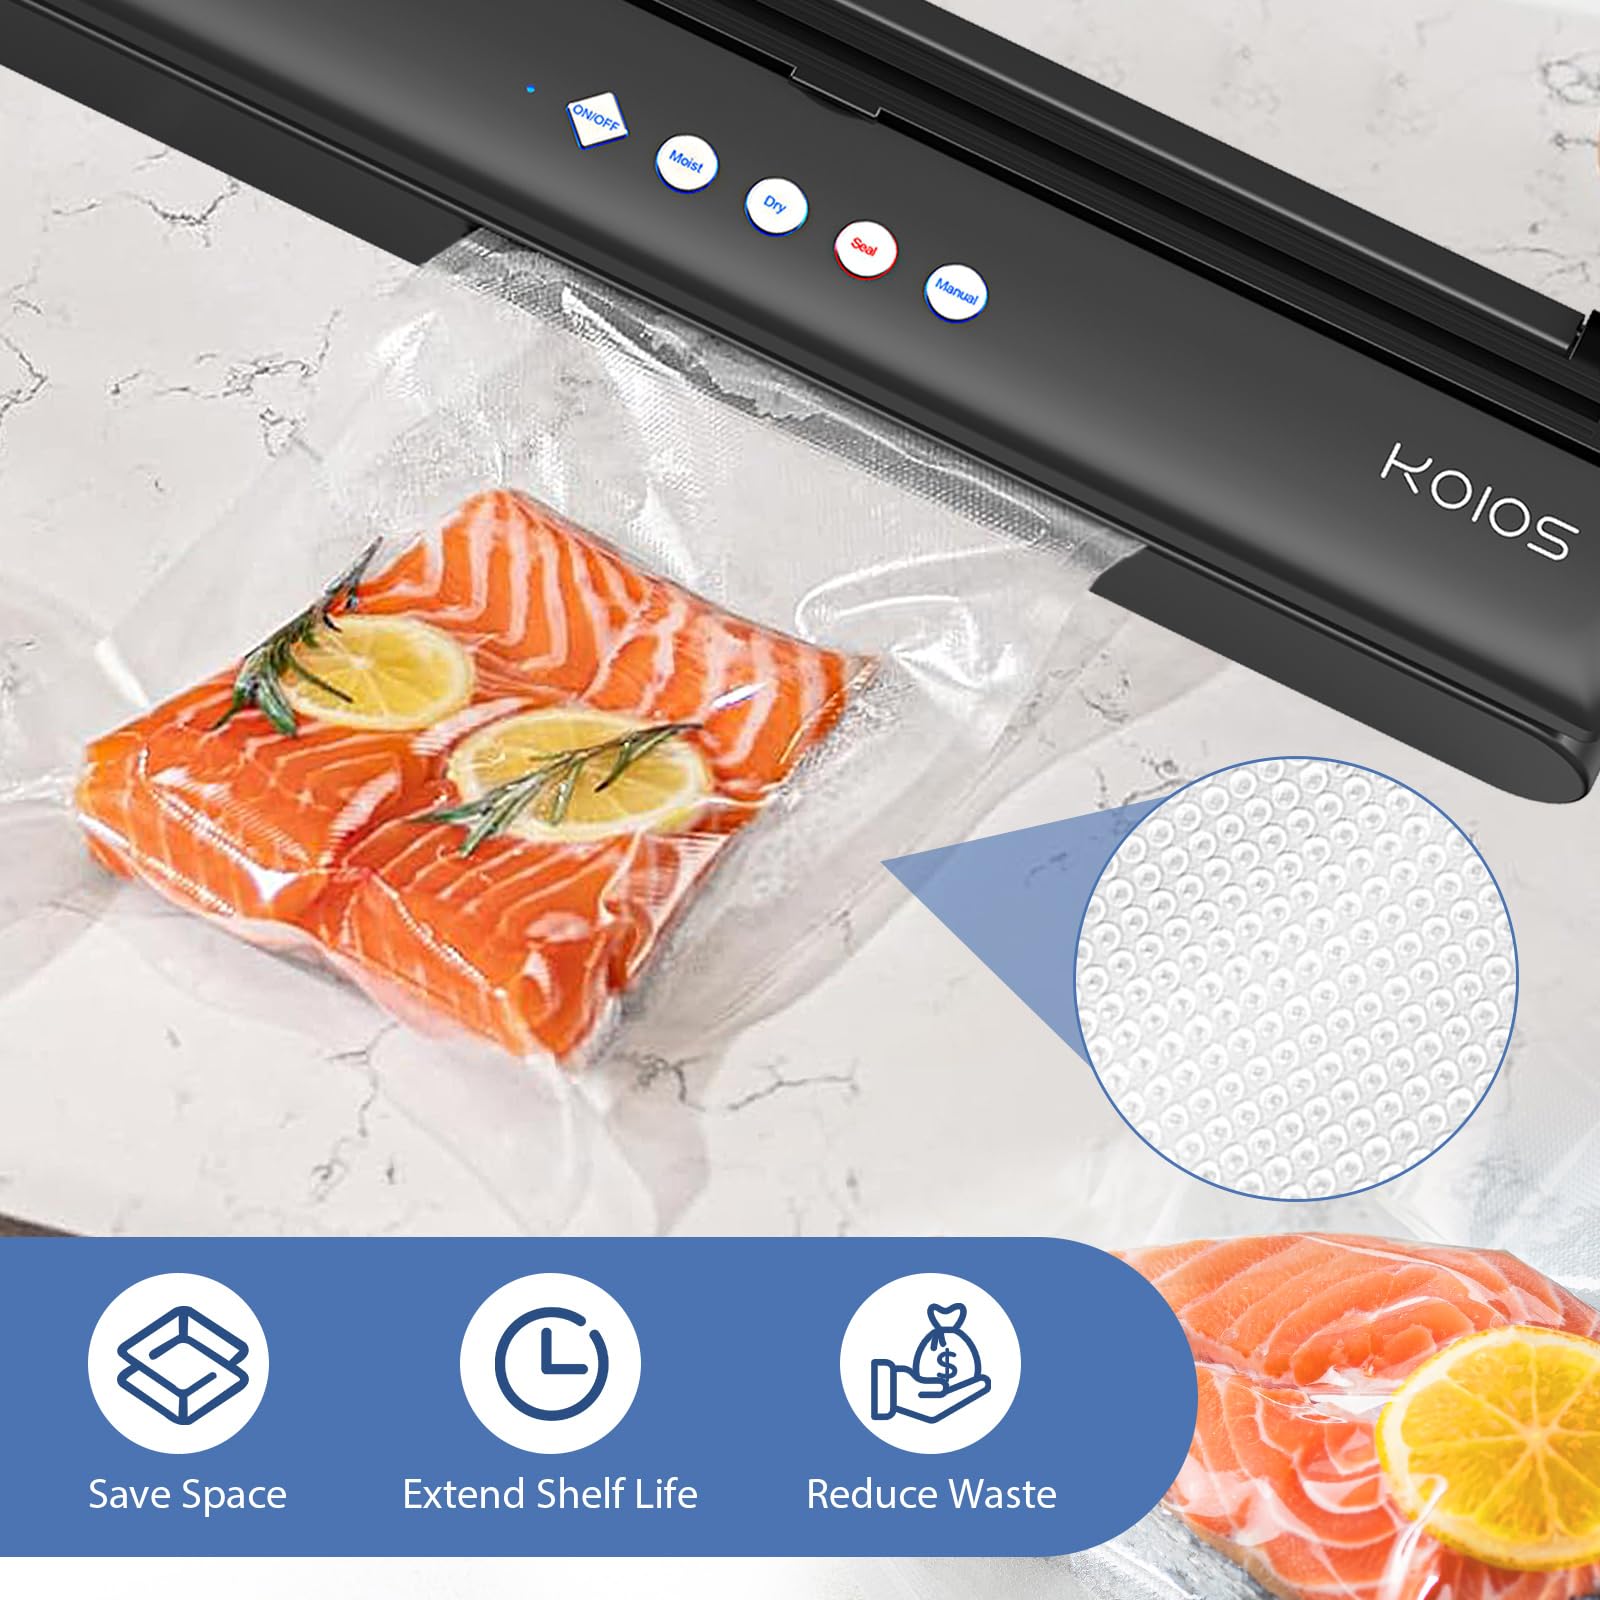 KOIOS Vacuum Sealer Machine, Automatic Food Sealer with Cutter, Dry & Moist Modes, Compact Design Powerful Suction Air Sealing System with 10 Sealing Bags & Air Suction Hose